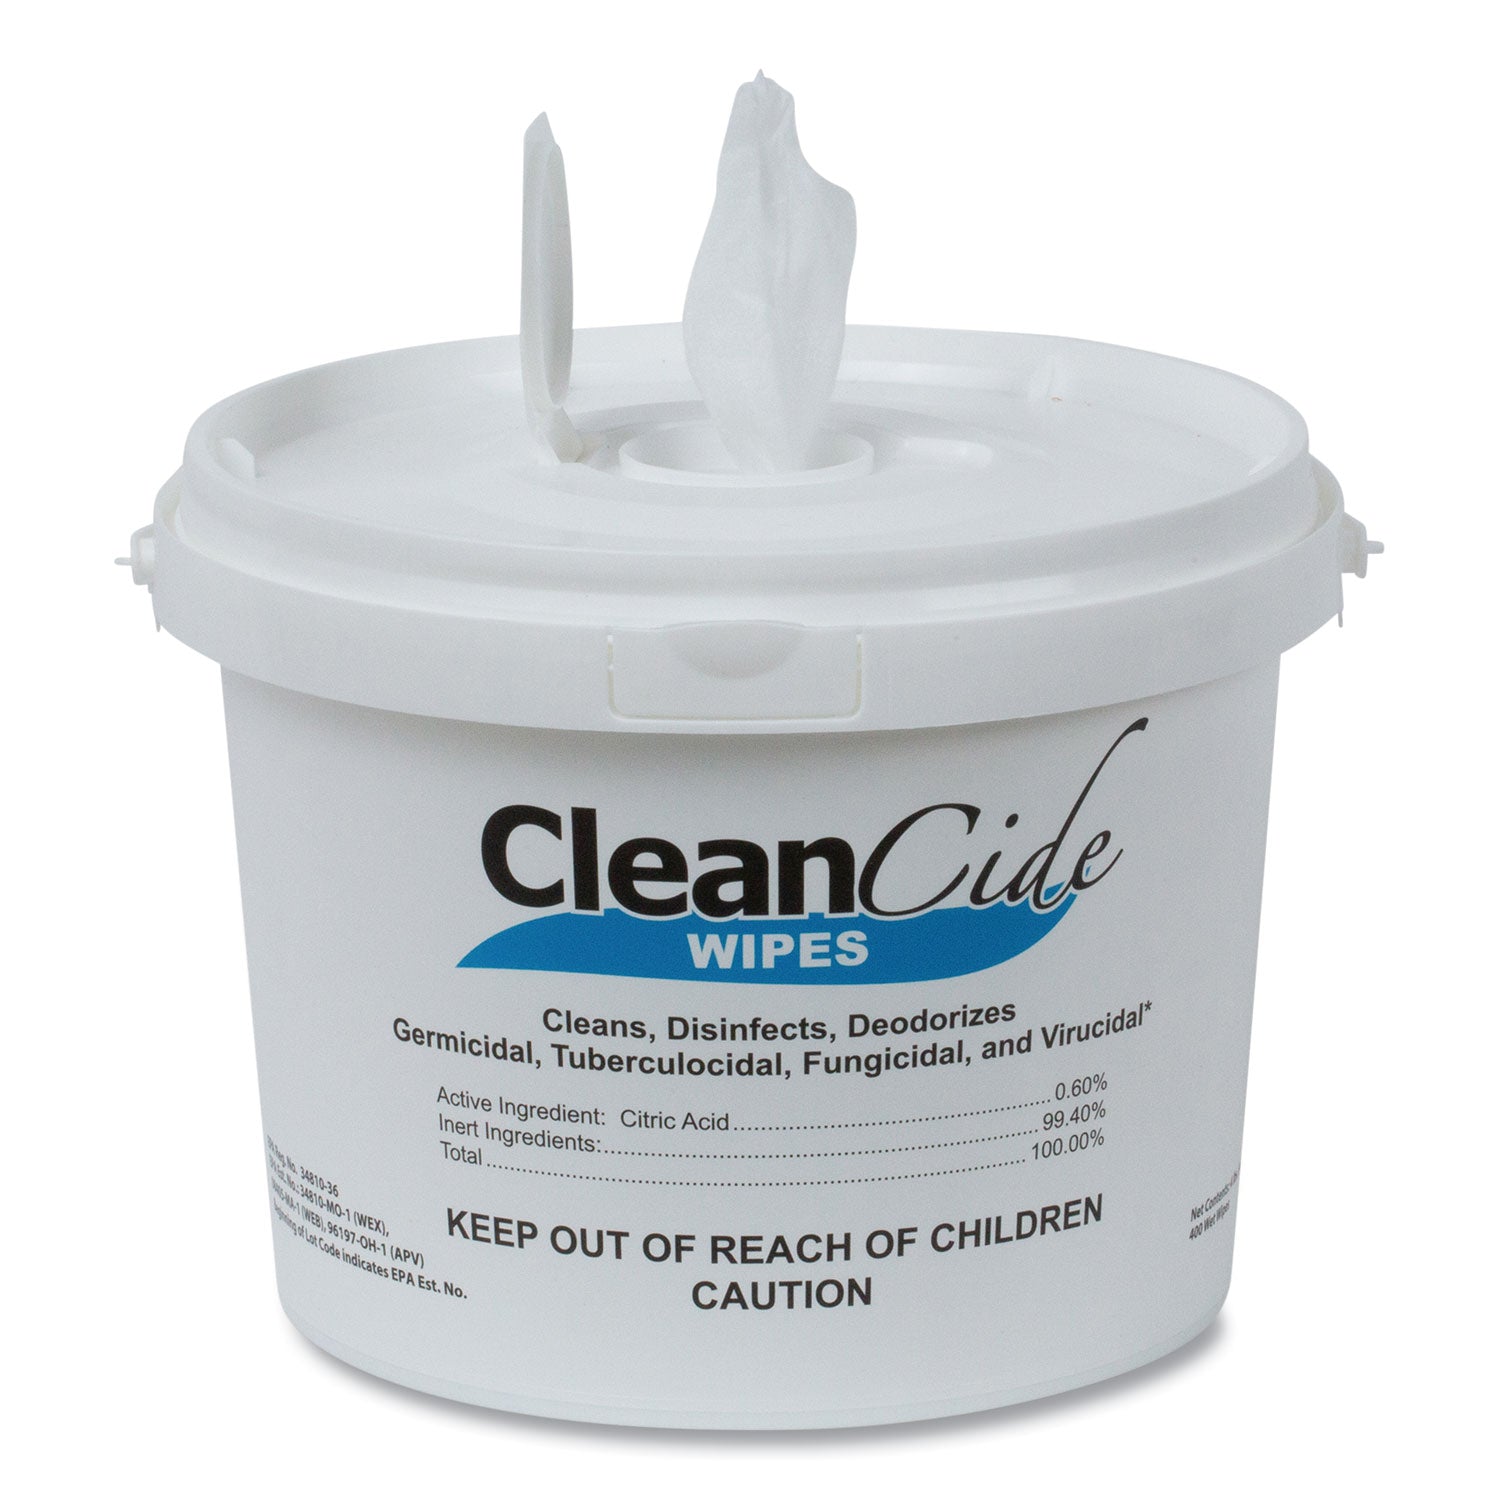 cleancide-disinfecting-wipes-1-ply-8-x-55-fresh-scent-white-400-tub-4-tubs-carton_wxf3130b400dct - 1